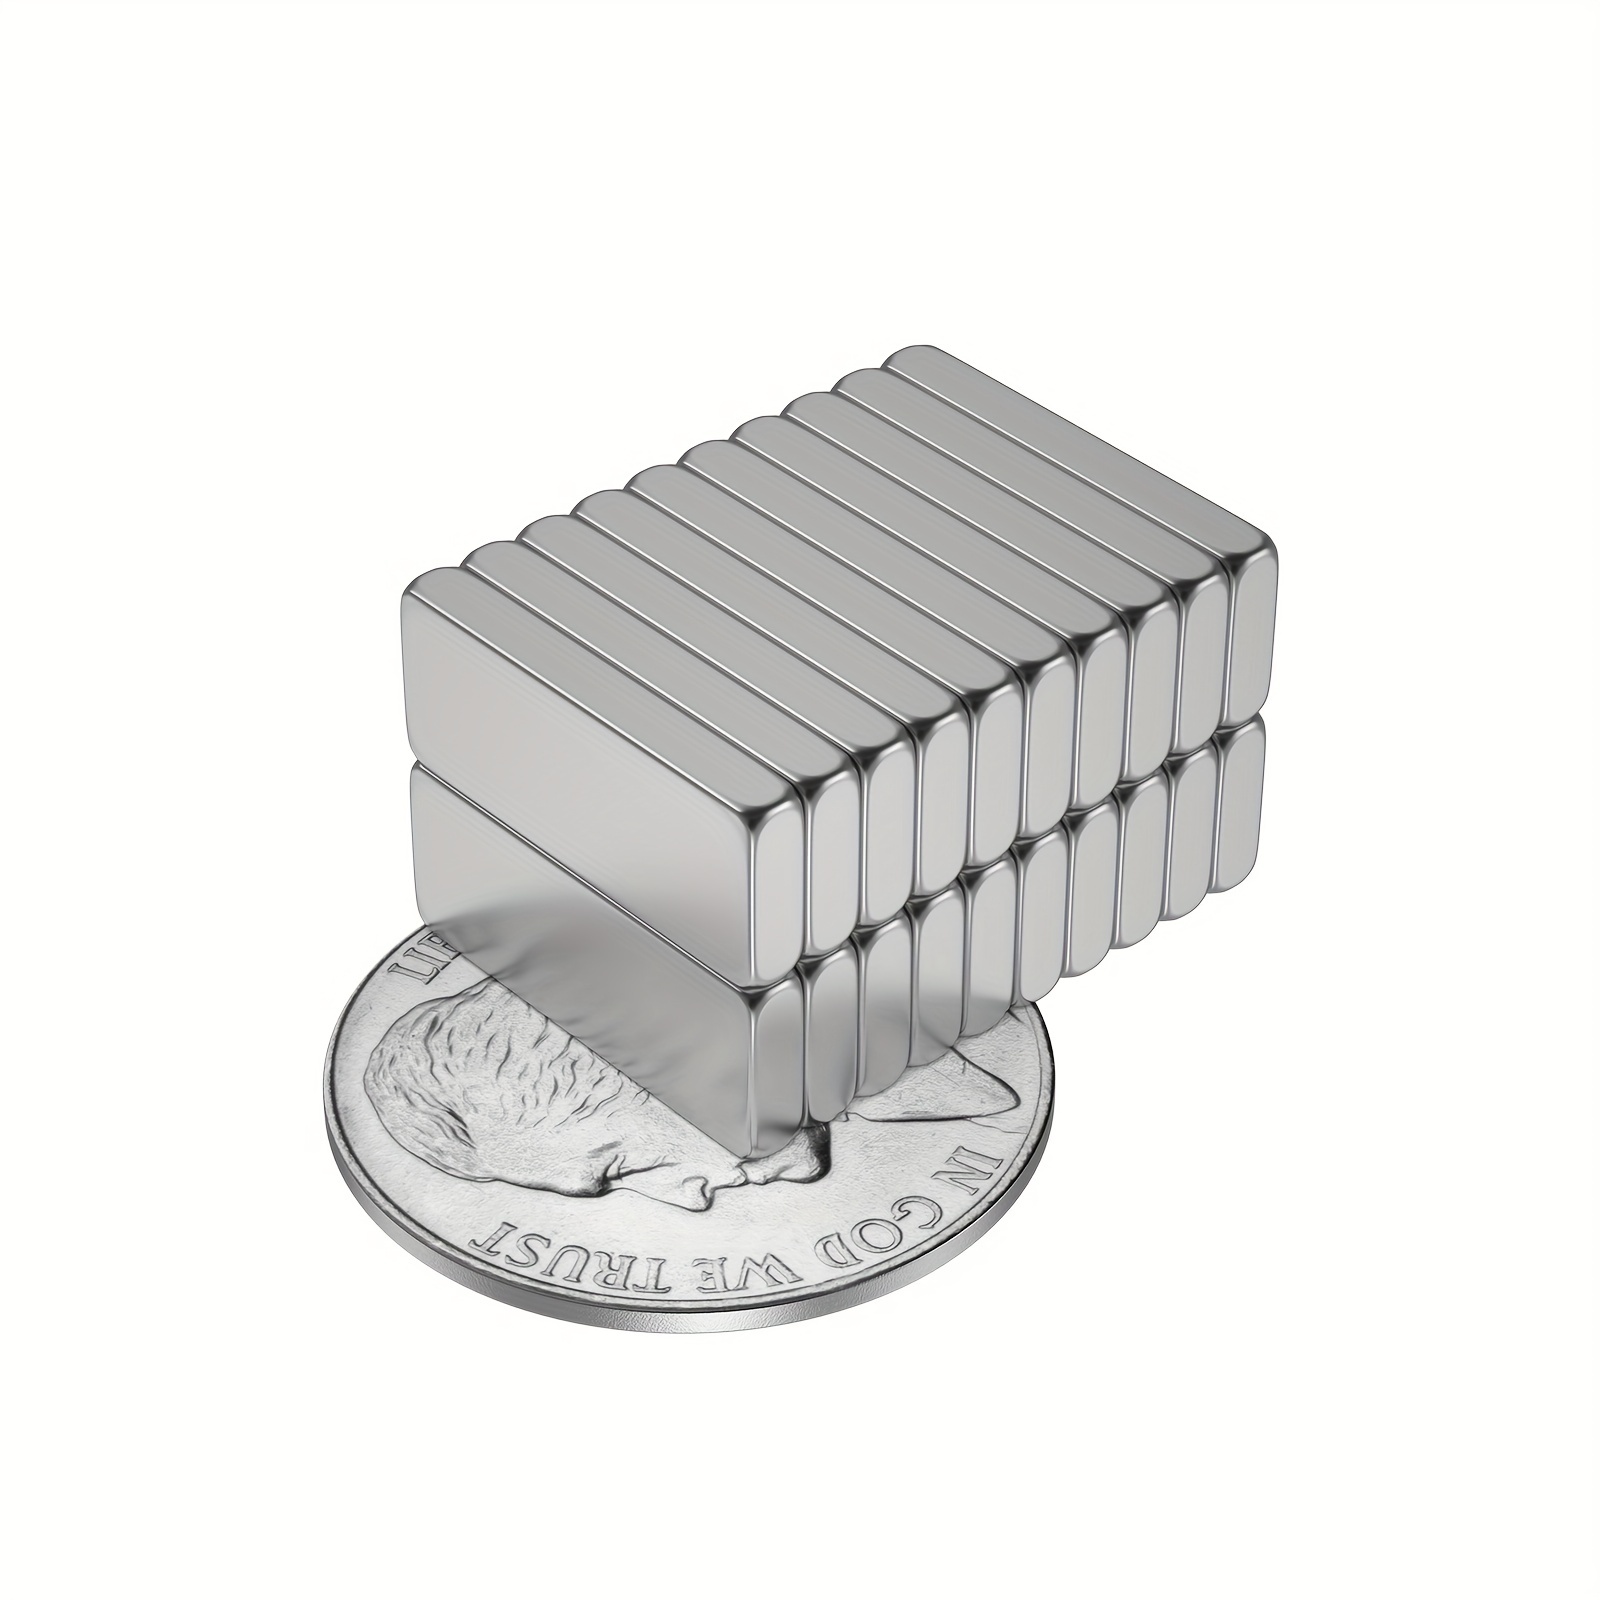 10pcs 5mm Square Cube Magnets Small Strong Neodymium Magnets For Fridge  Office Magnets